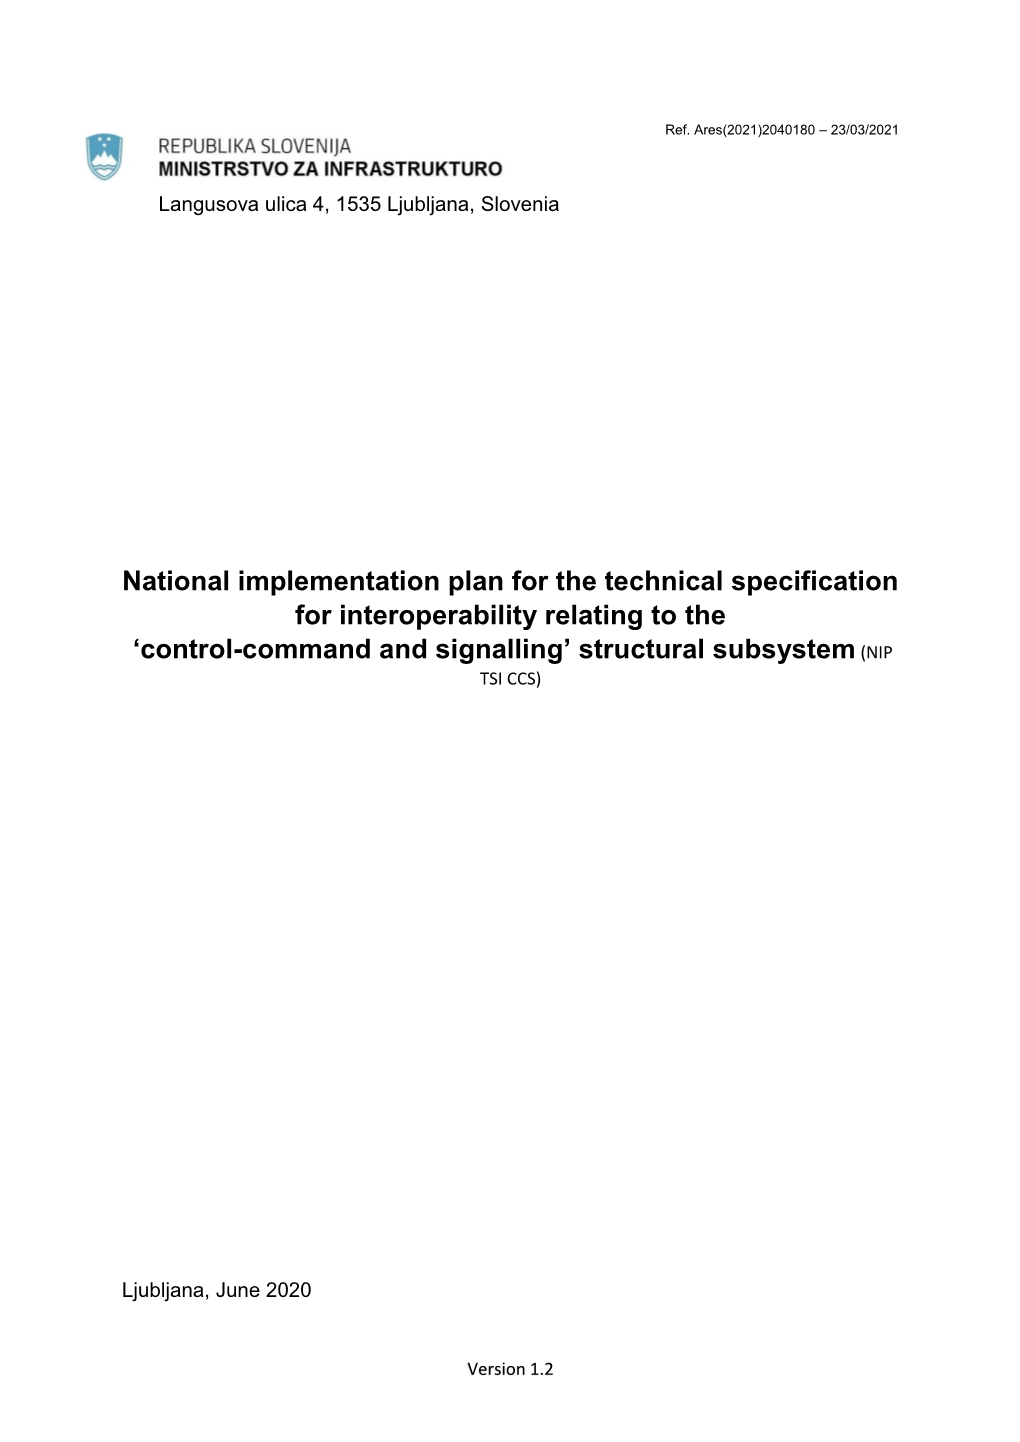 National Implementation Plan for the Technical Specification for Interoperability Relating to the ‘Control-Command and Signalling’ Structural Subsystem (NIP TSI CCS)